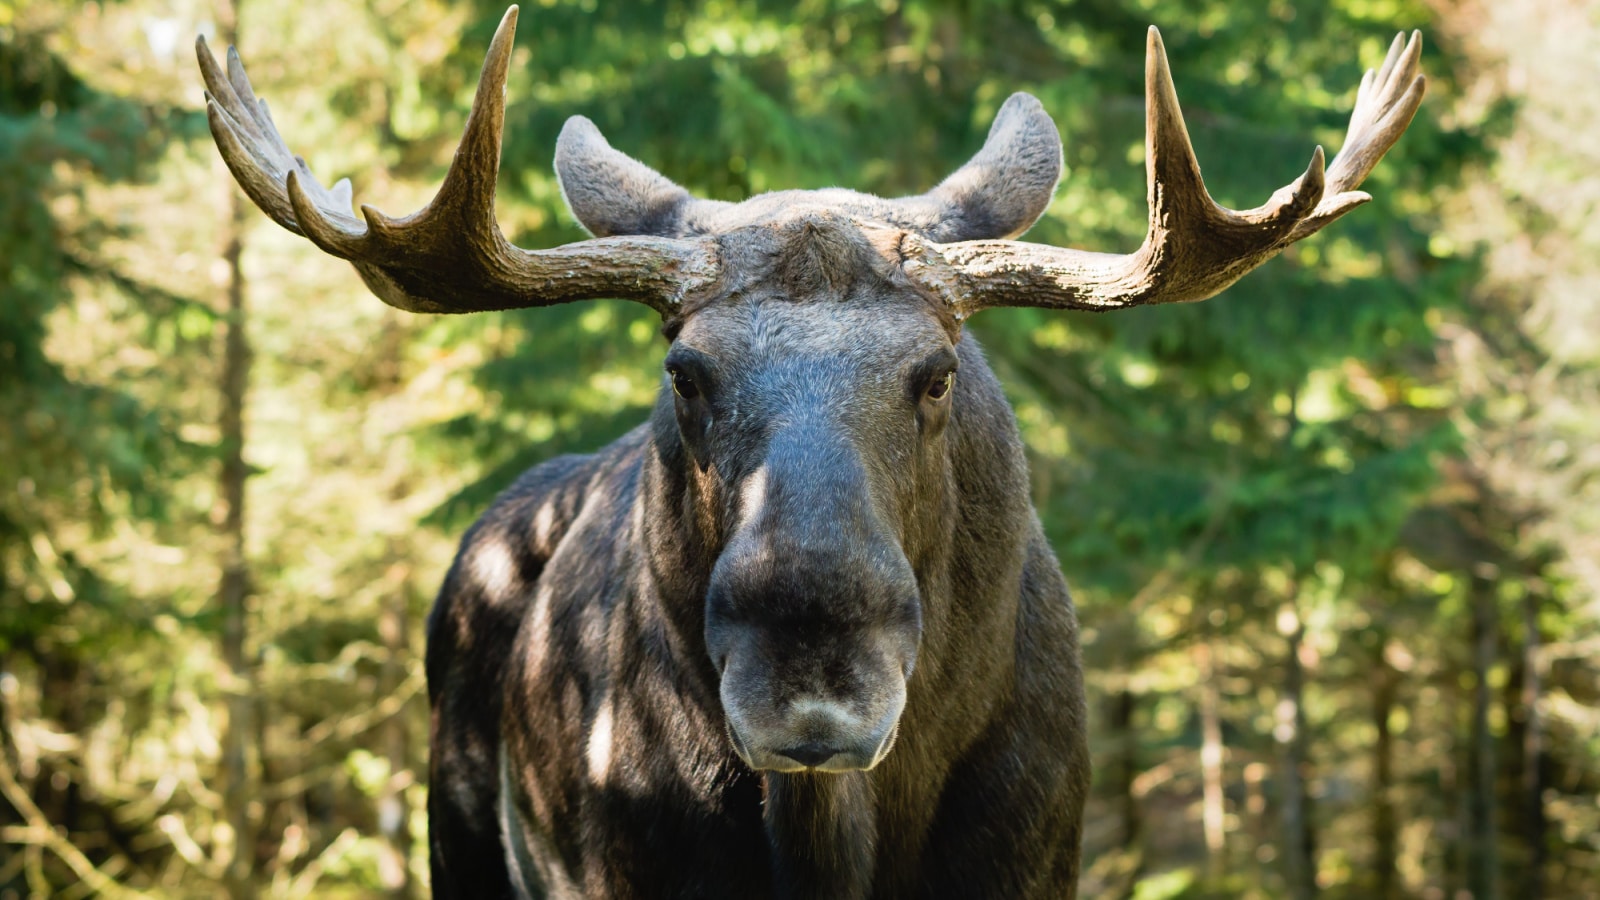 Moose bull (Alces alces) look straight at you with mean eyes. He is truly the king in this forest and will not take lightly on trespassers.